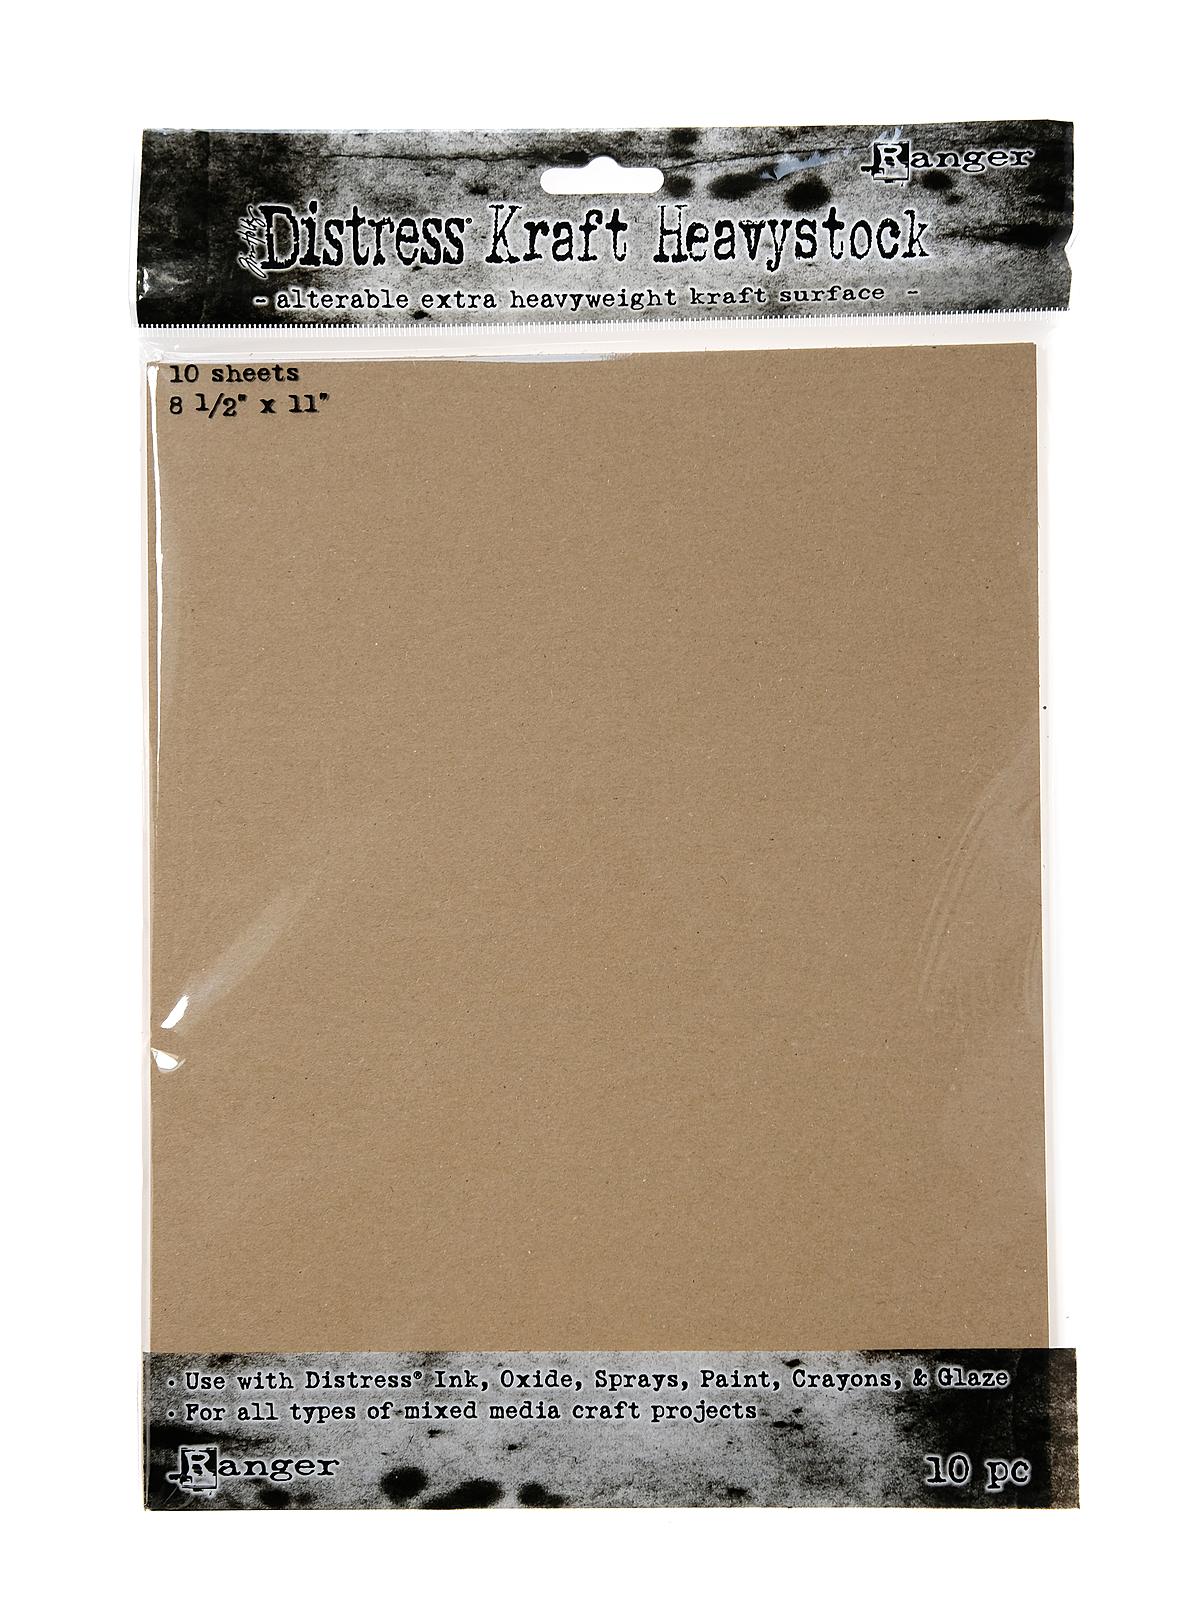 Tim Holtz Distress Heavystock Kraft 8 1 2 In. X 11 In. Pack Of 10 Sheets